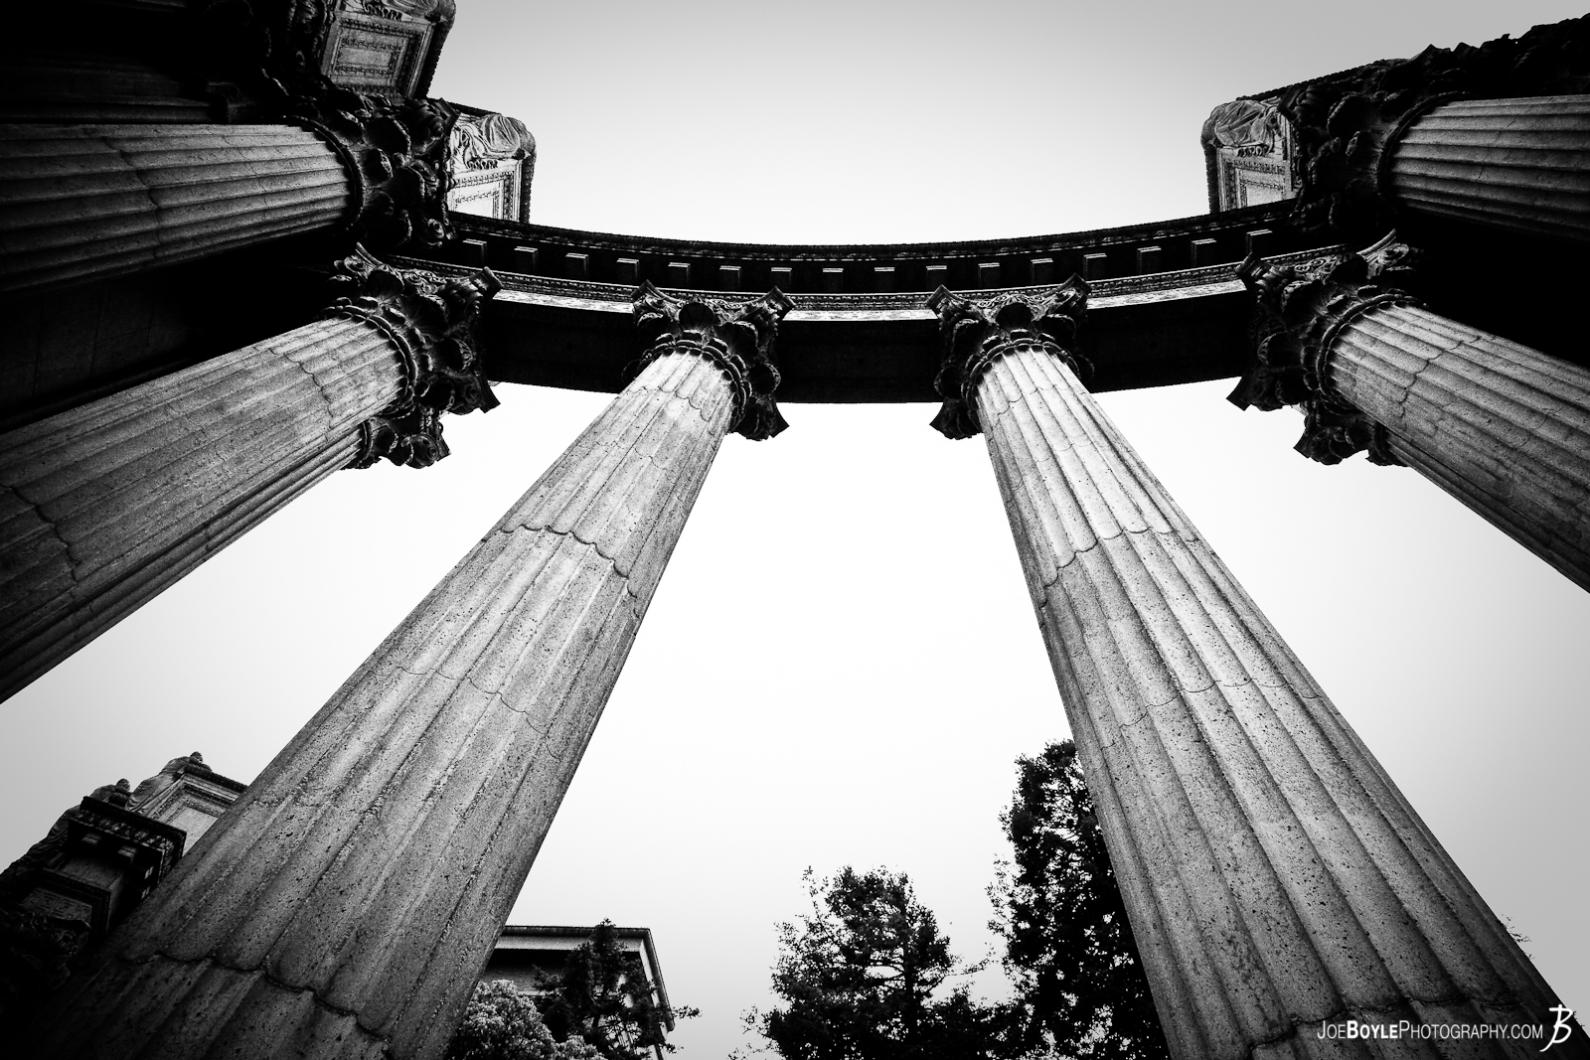 columns-within-the-palace-of-fine-arts-black-white